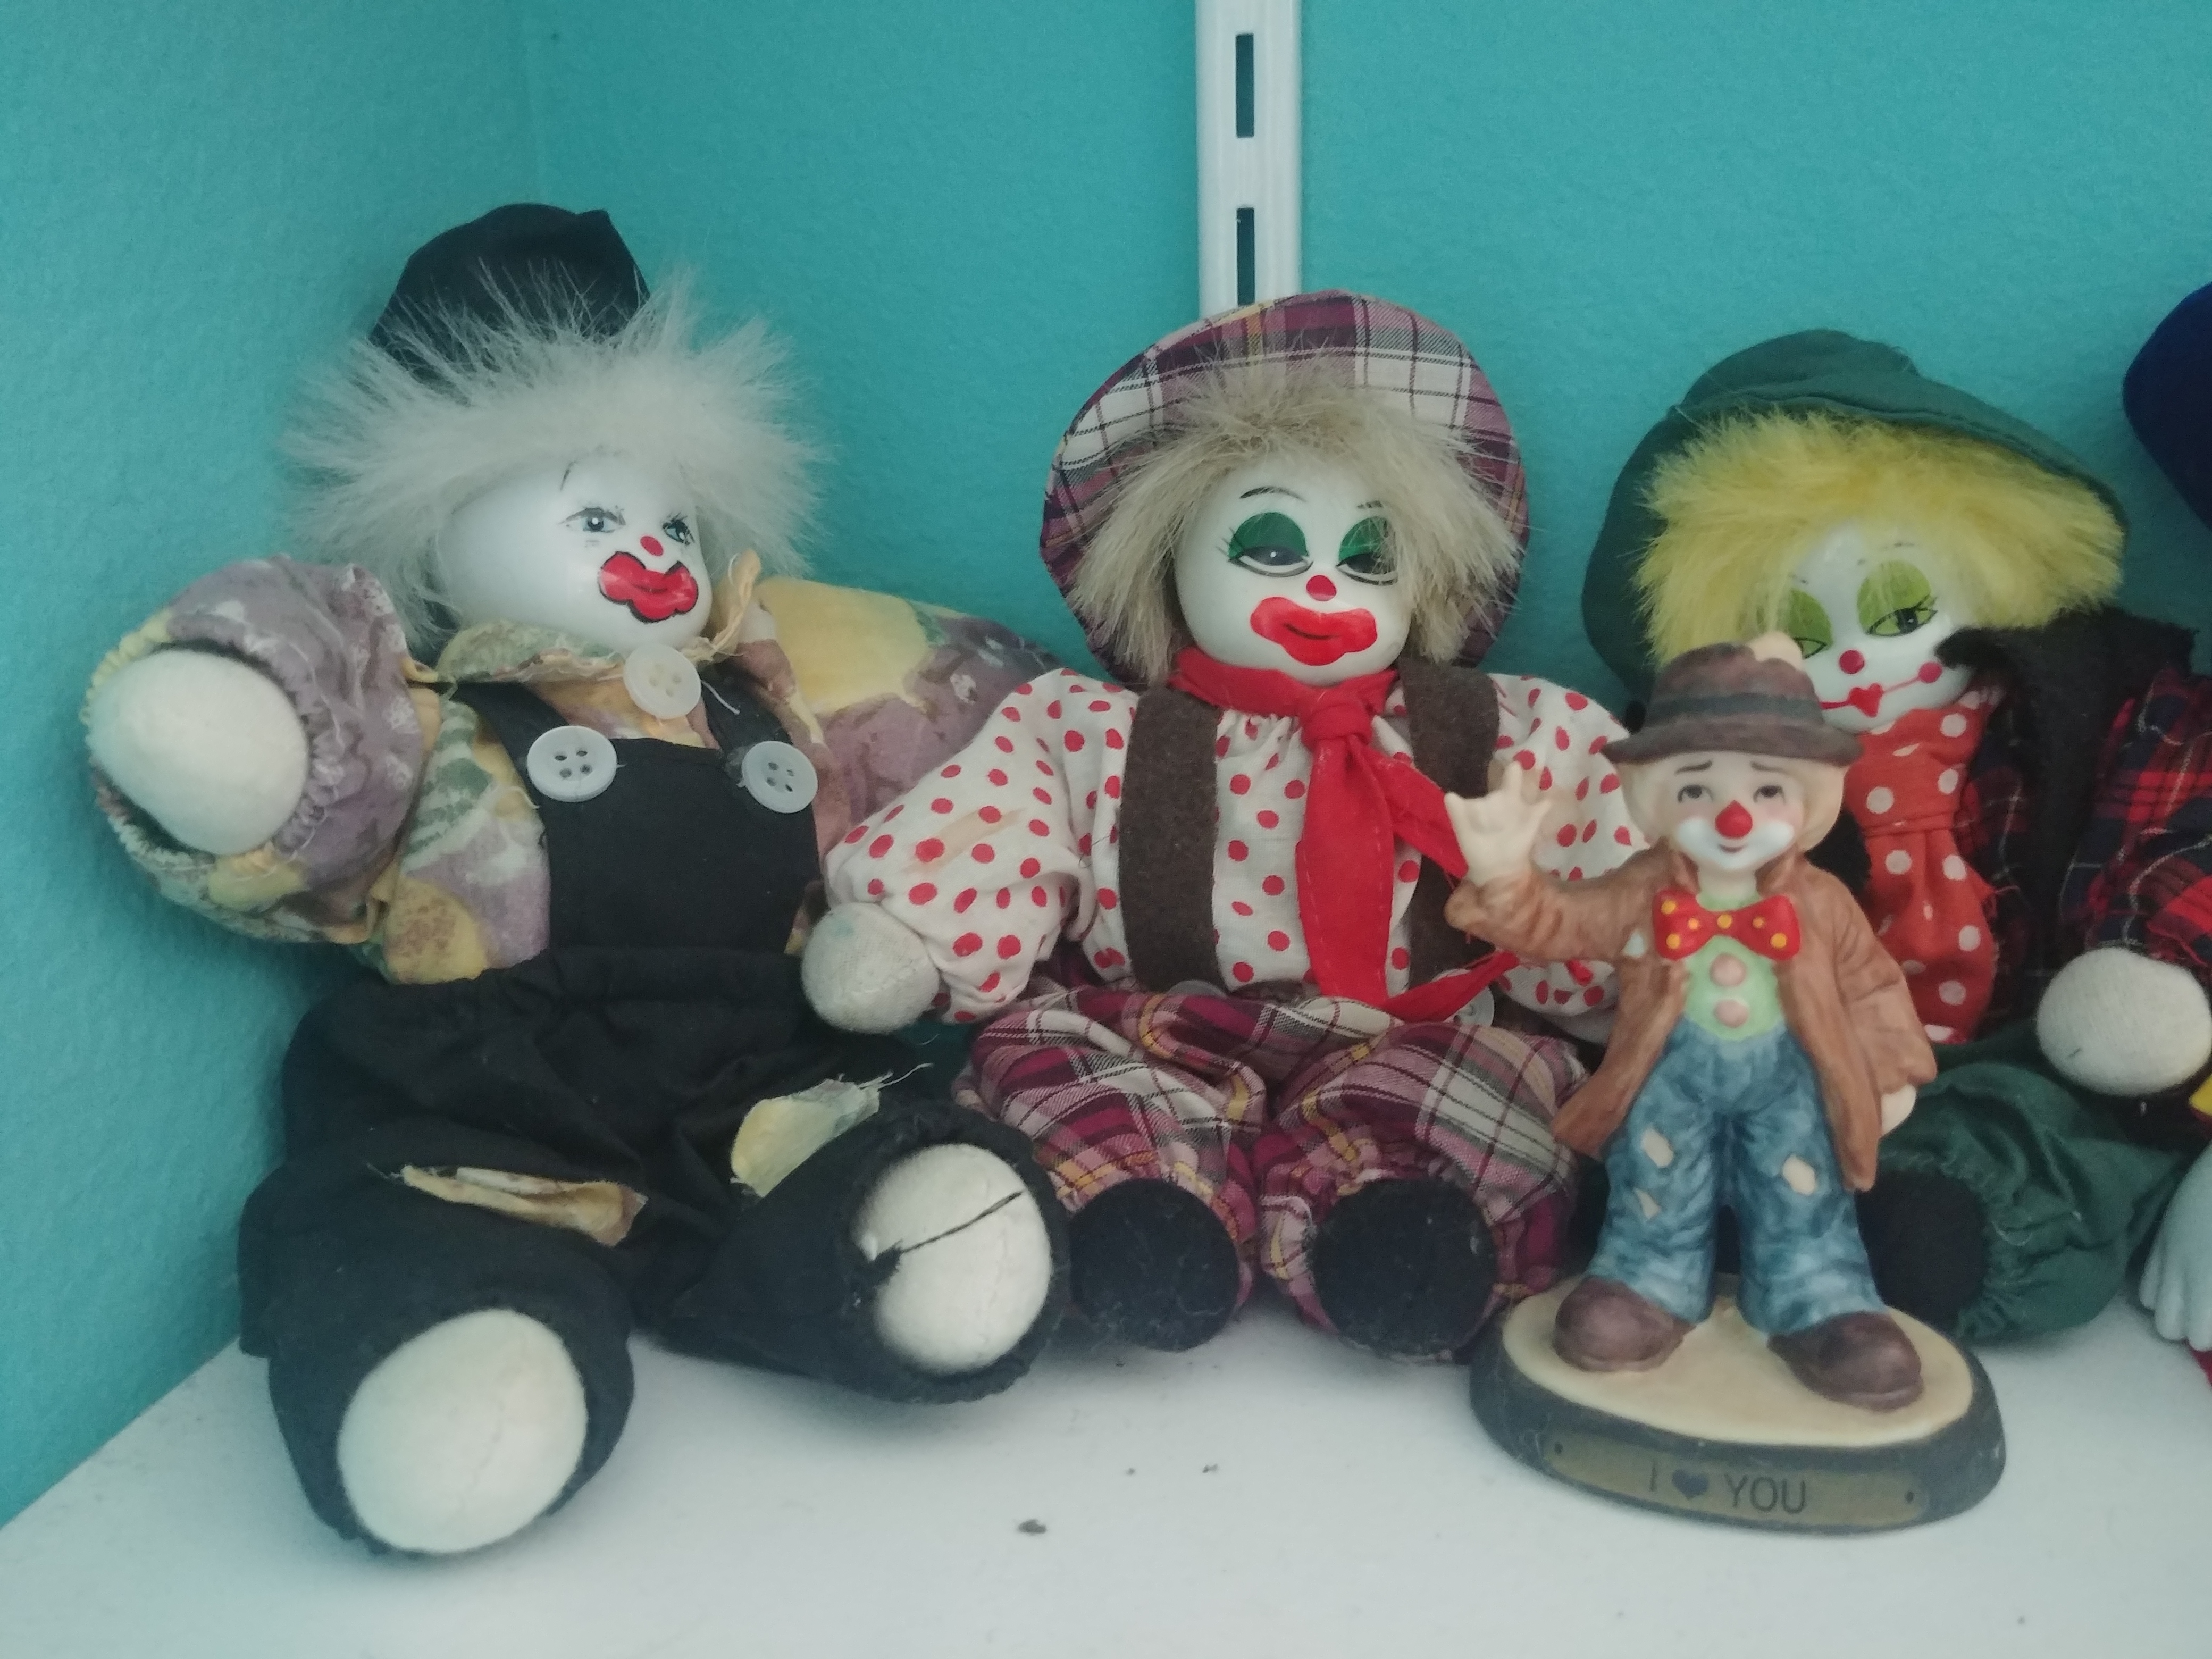 three clown dolls, a small statue of a clown in front